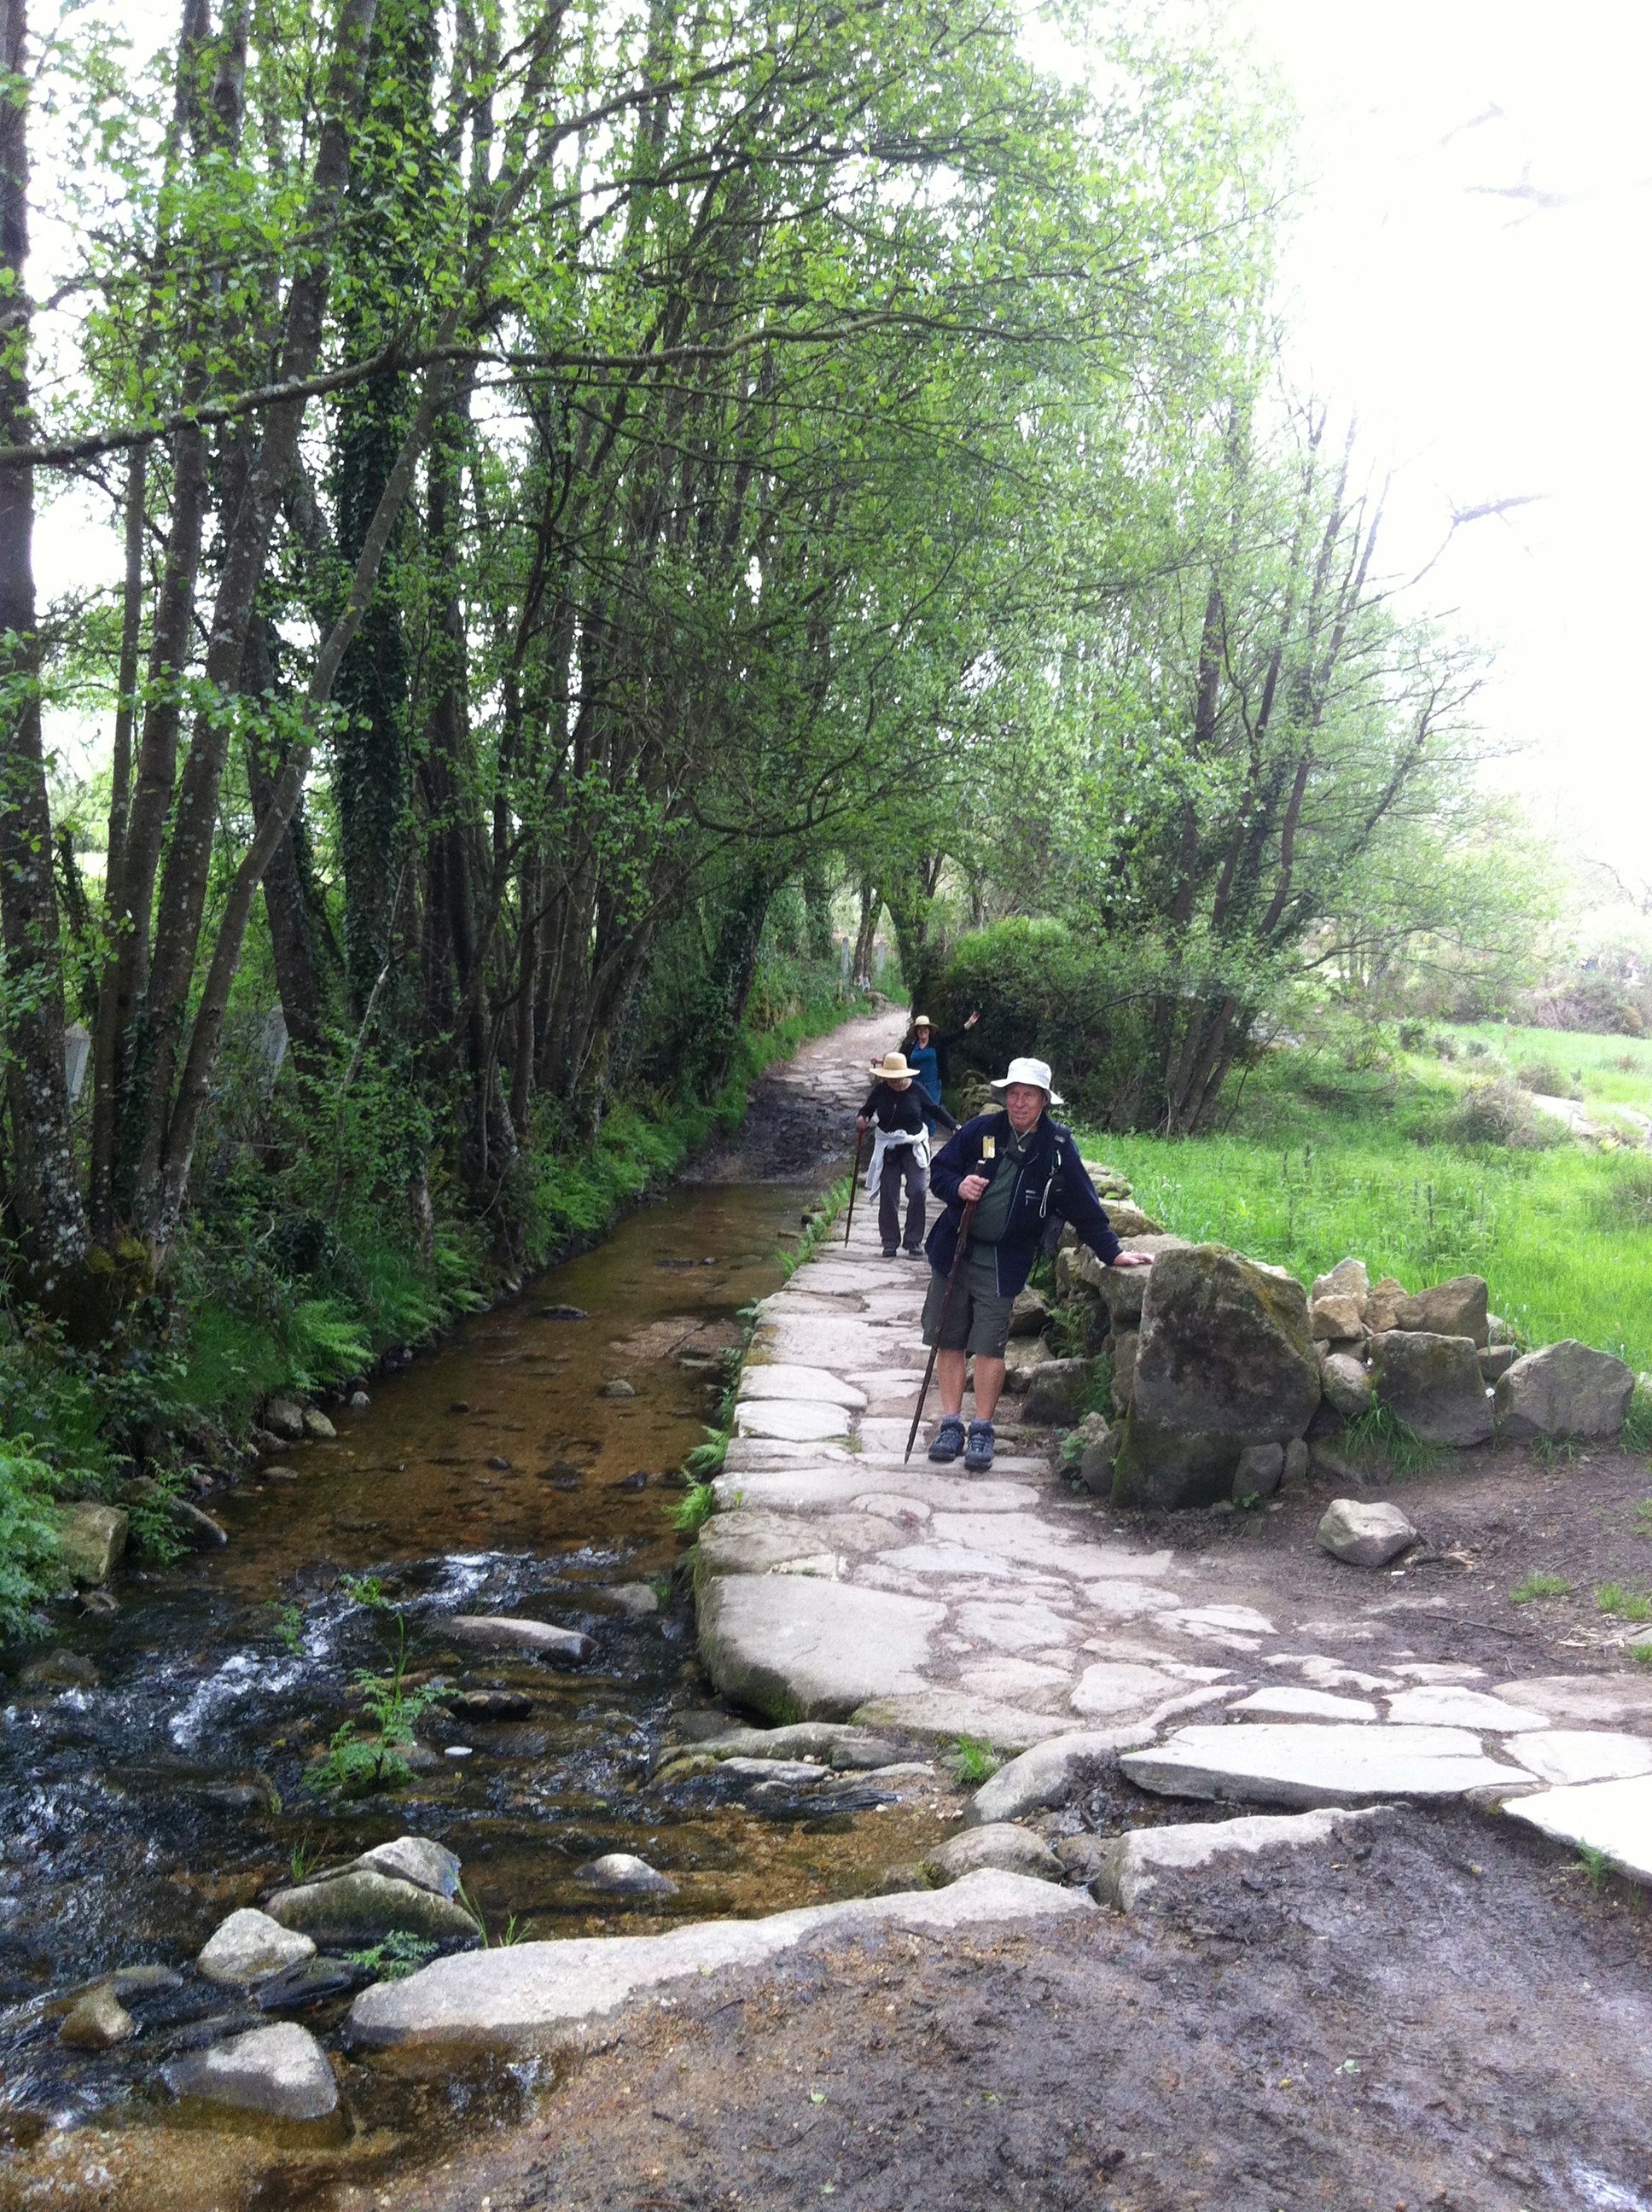 On the Camino!